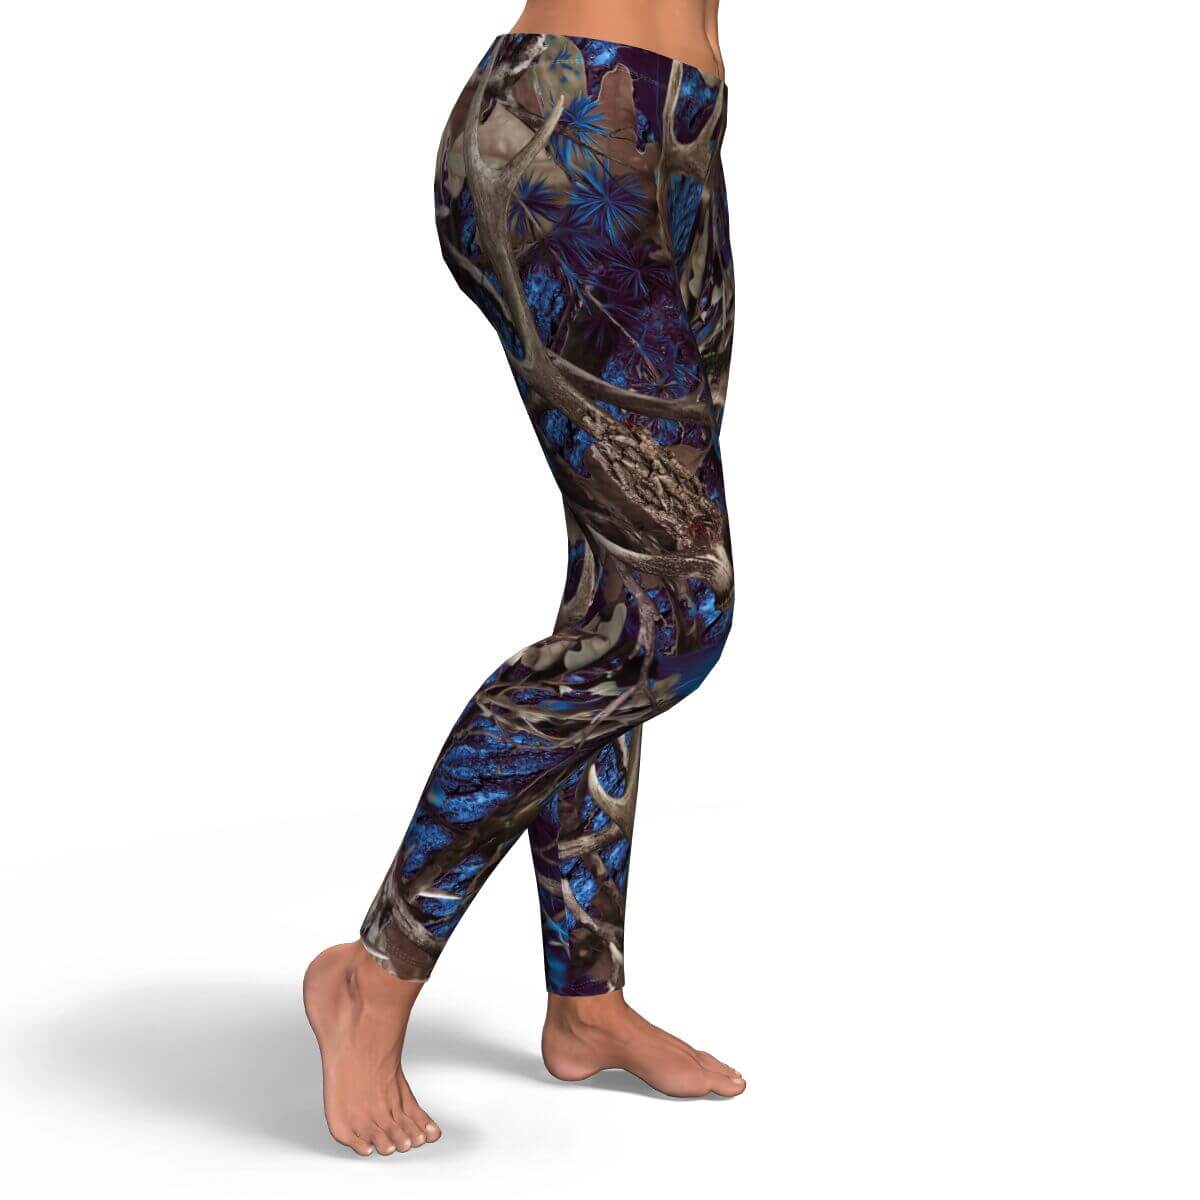 Turquoise Hunting Athletic Leggings - right